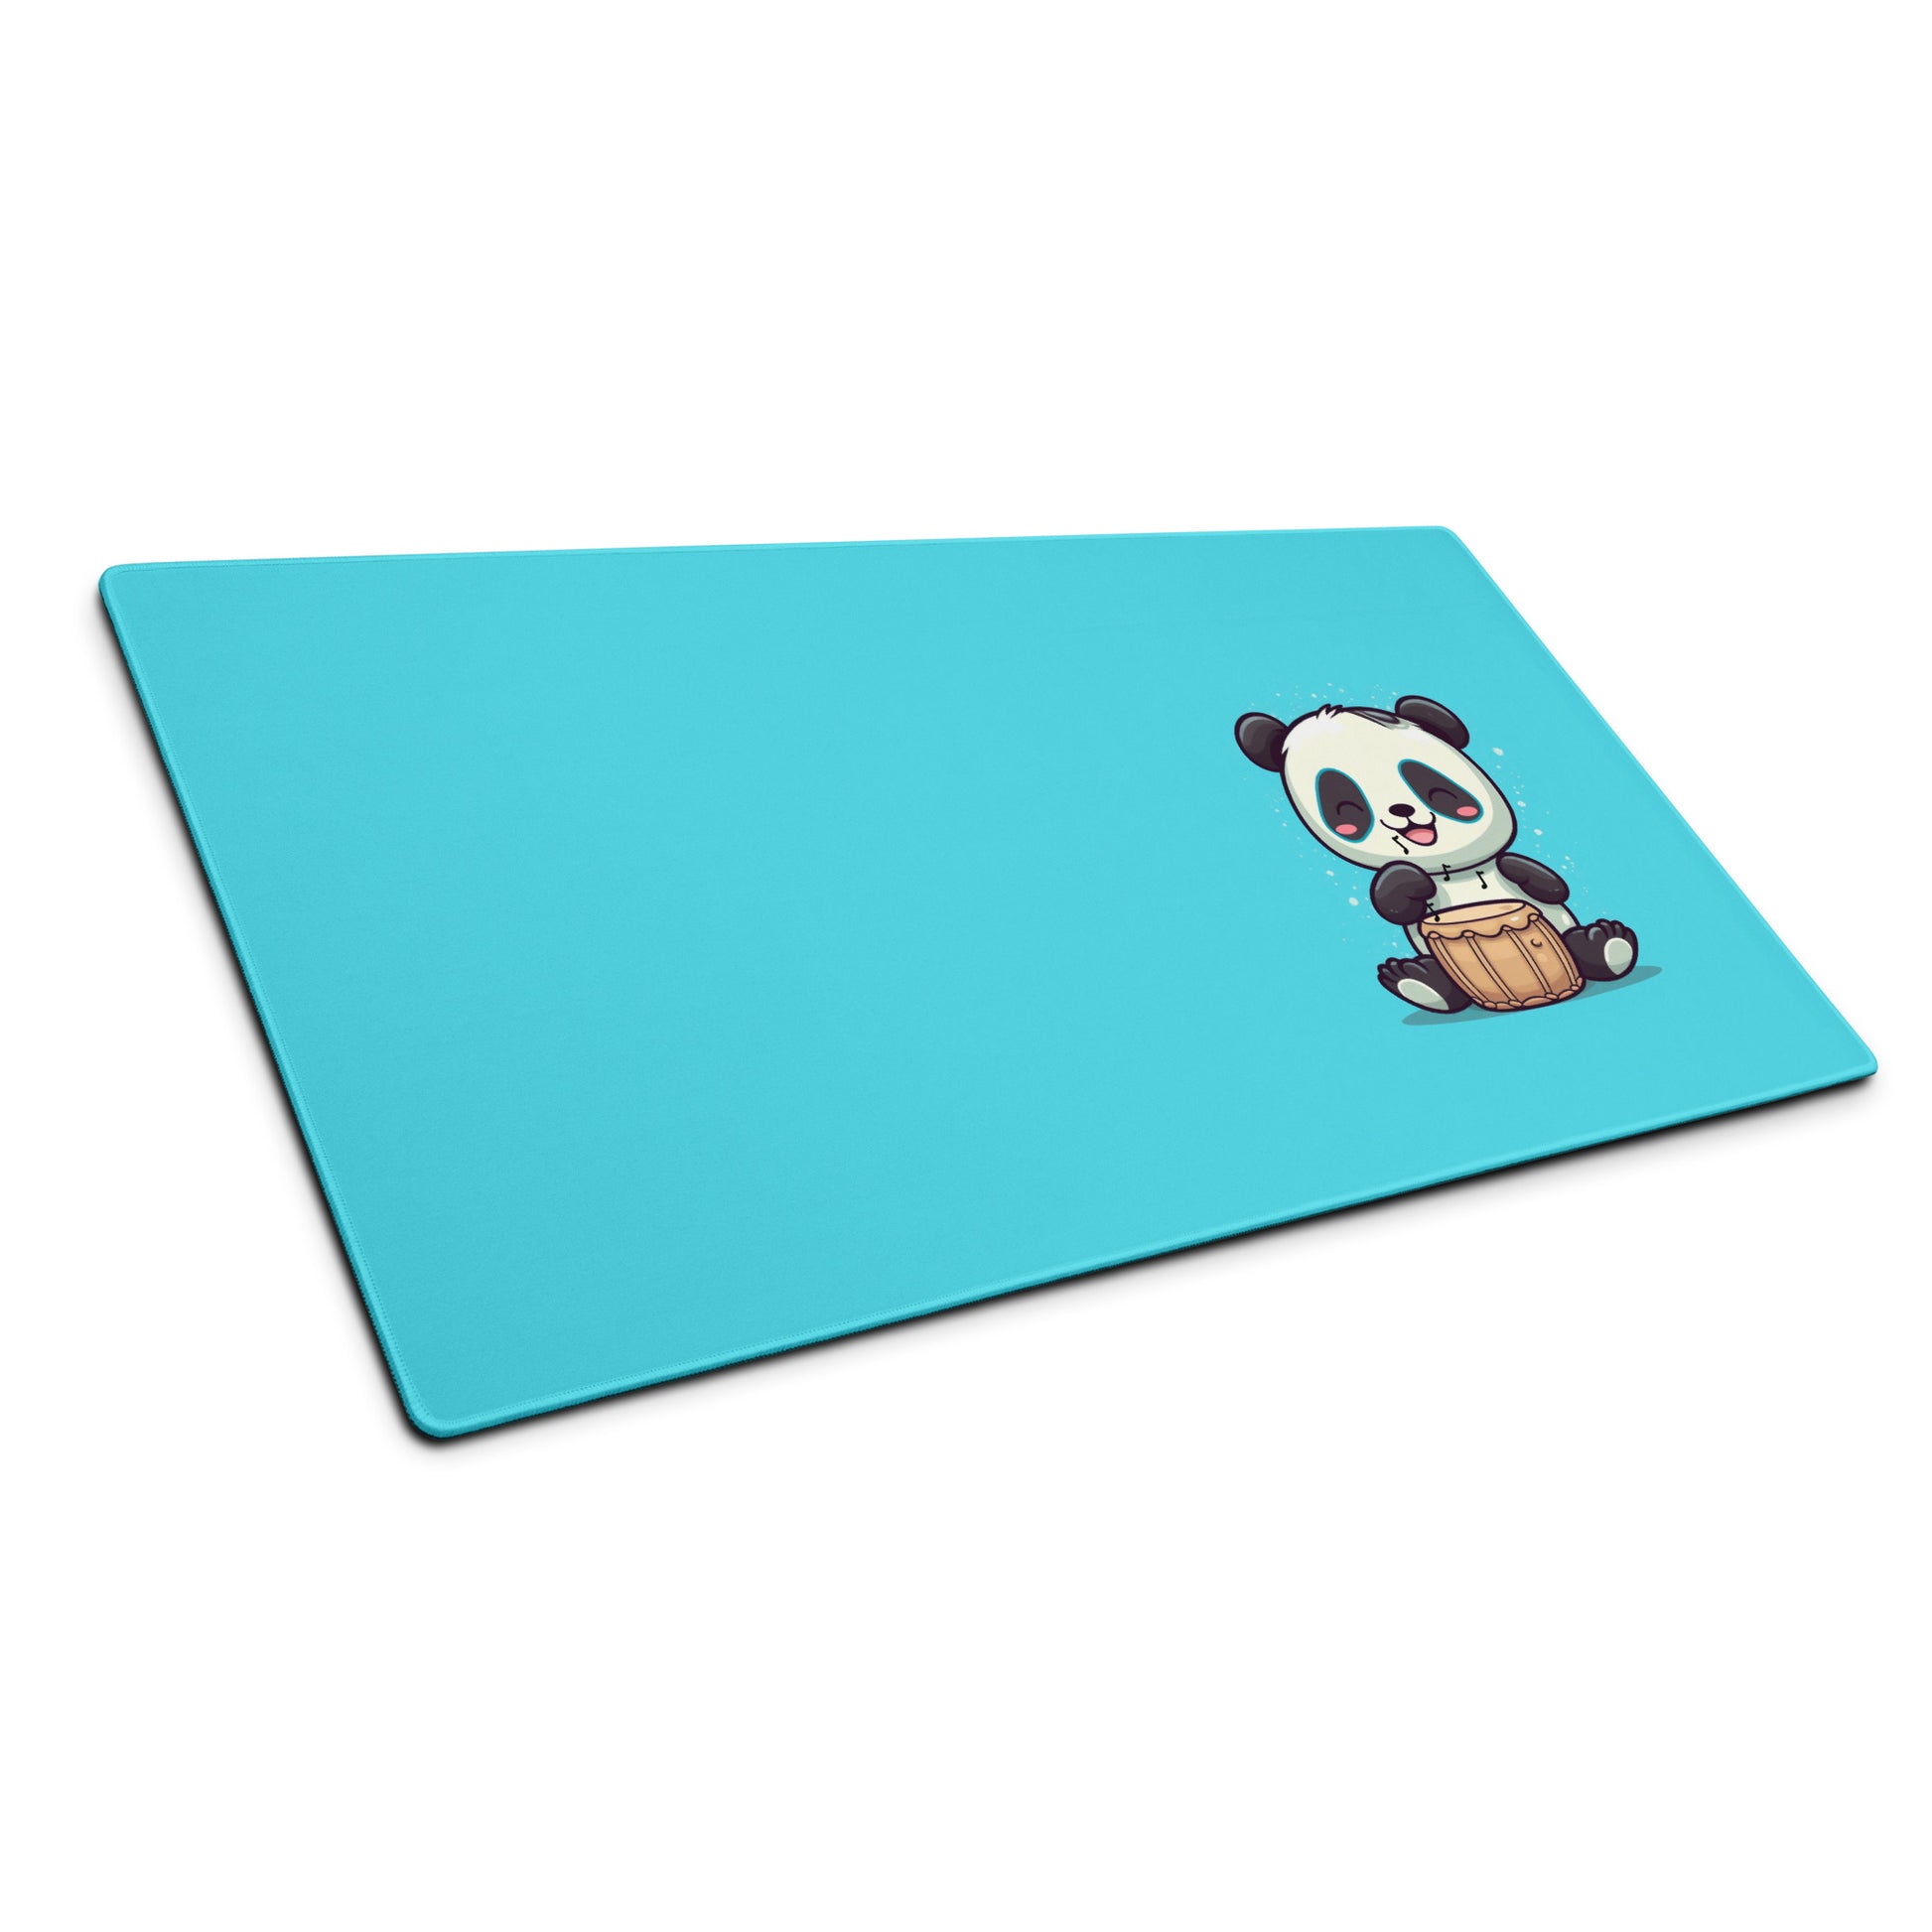 A 36" x 18" desk pad with a cute panda playing the bongos on the right shown at an angle. Blue in color.